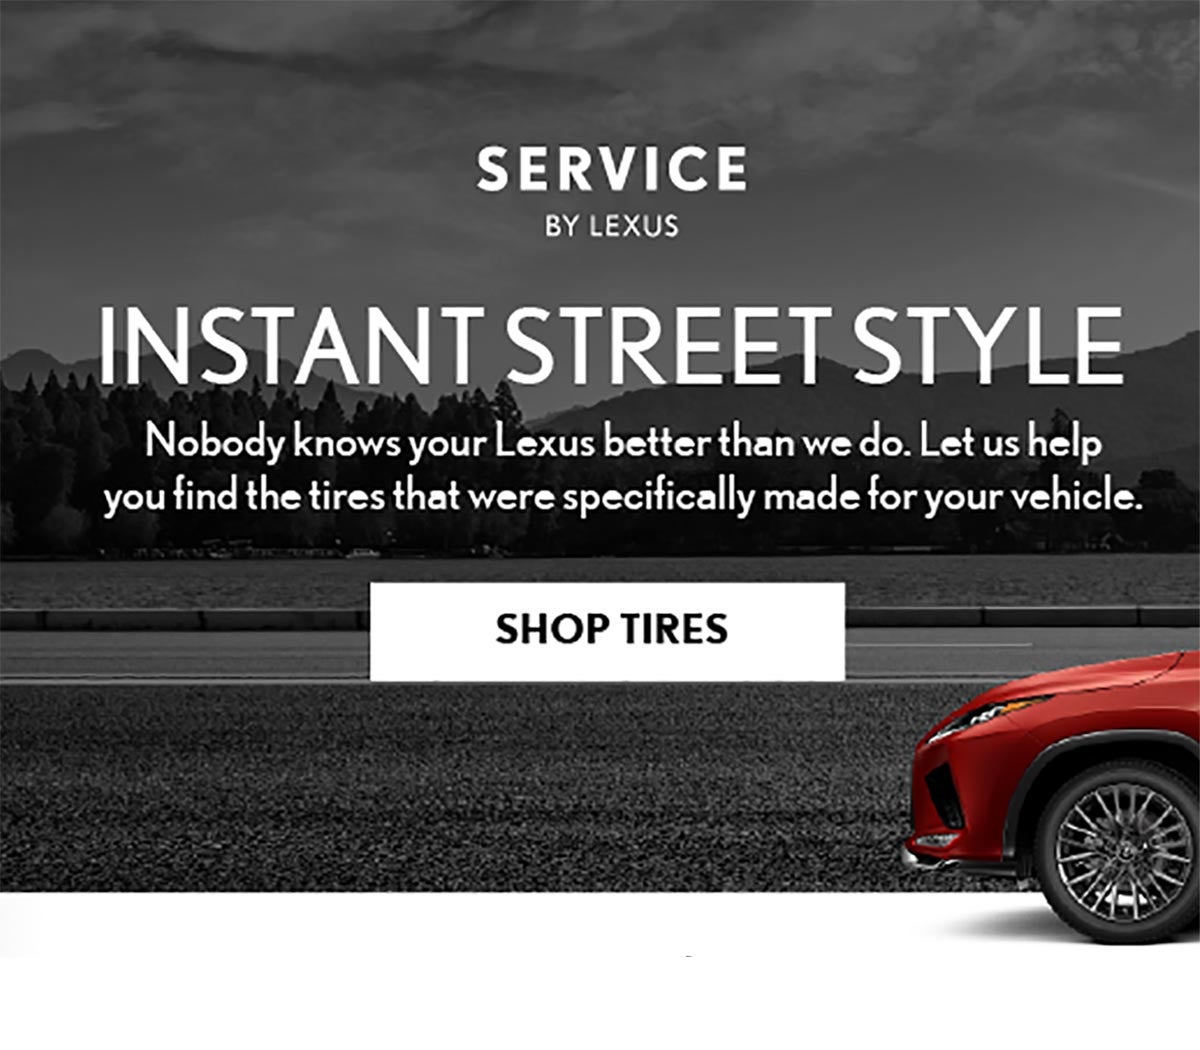 Instant Street Style - Nobody knows your Lexus better than we do. Let us help you find the tires that were specifically made for your vehicle.